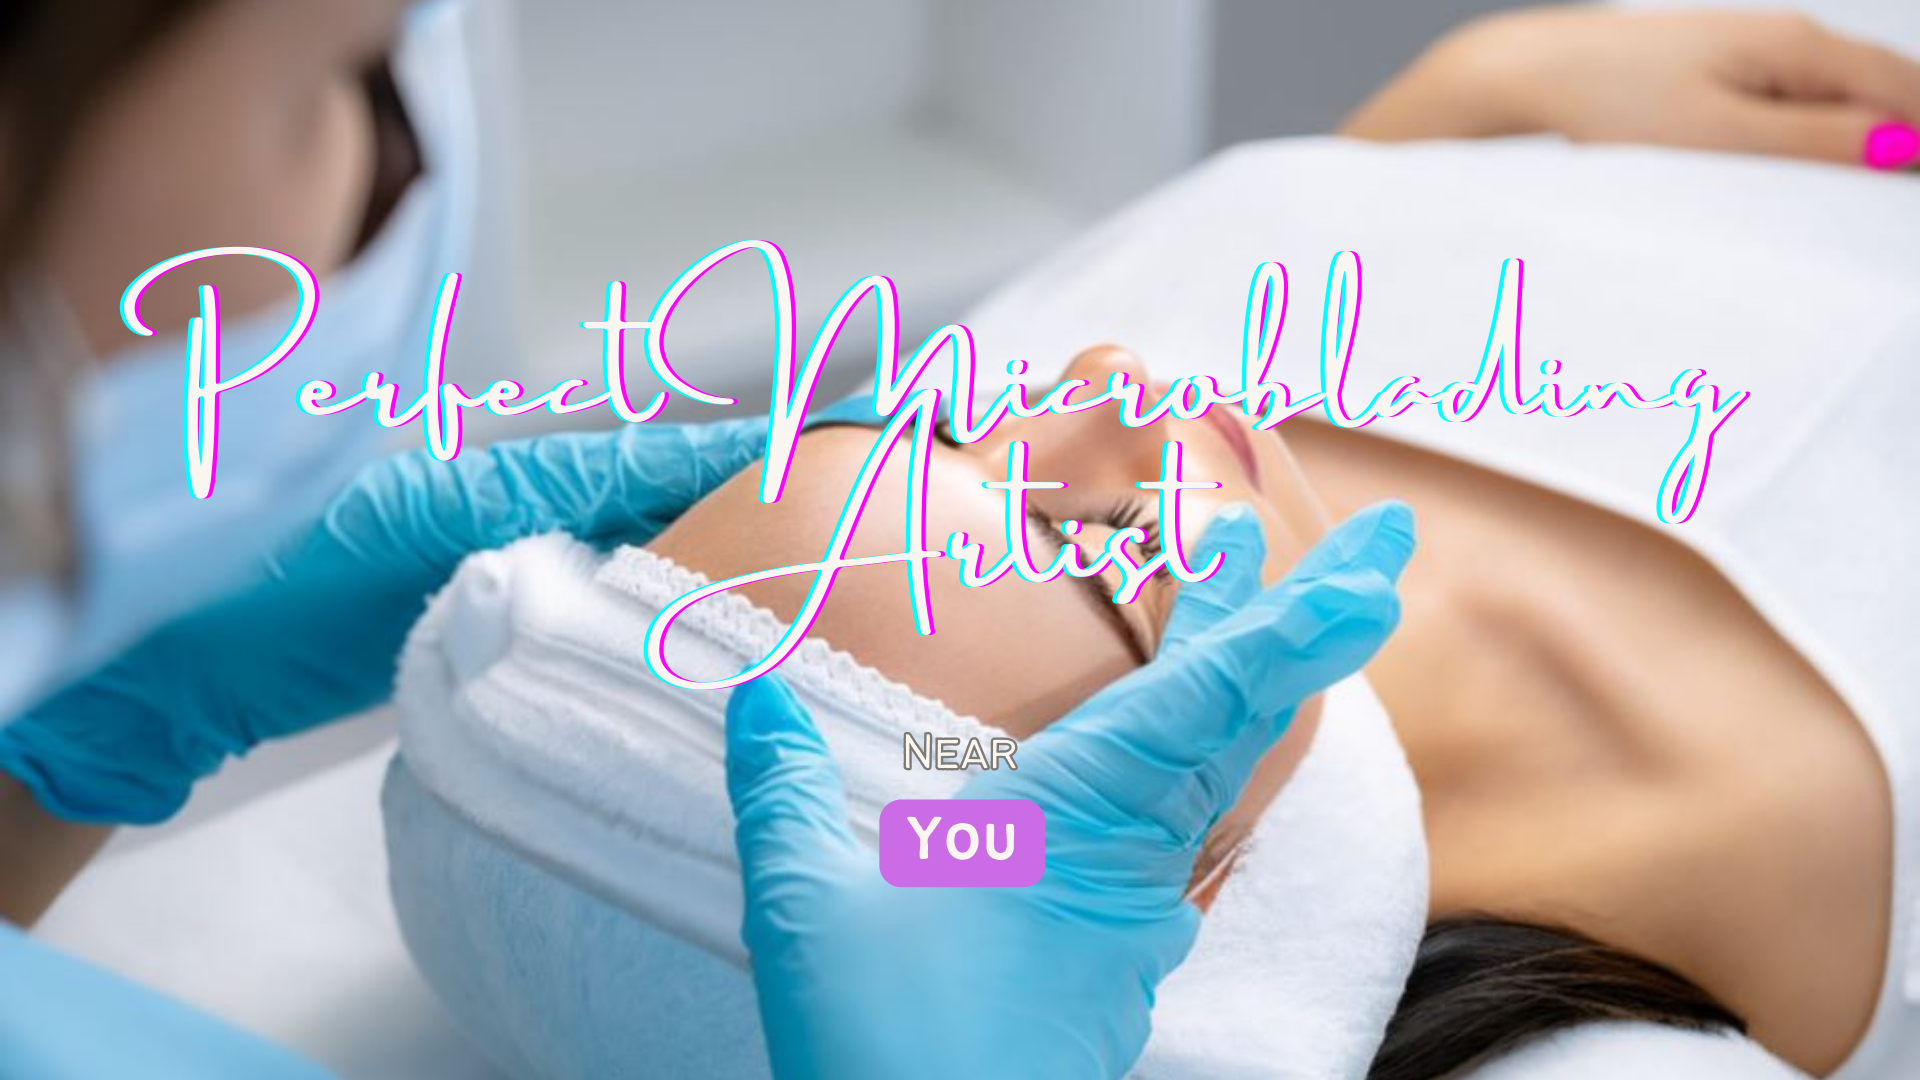 Microblading Near Me: Find the Best Microblading Artists in Your Area